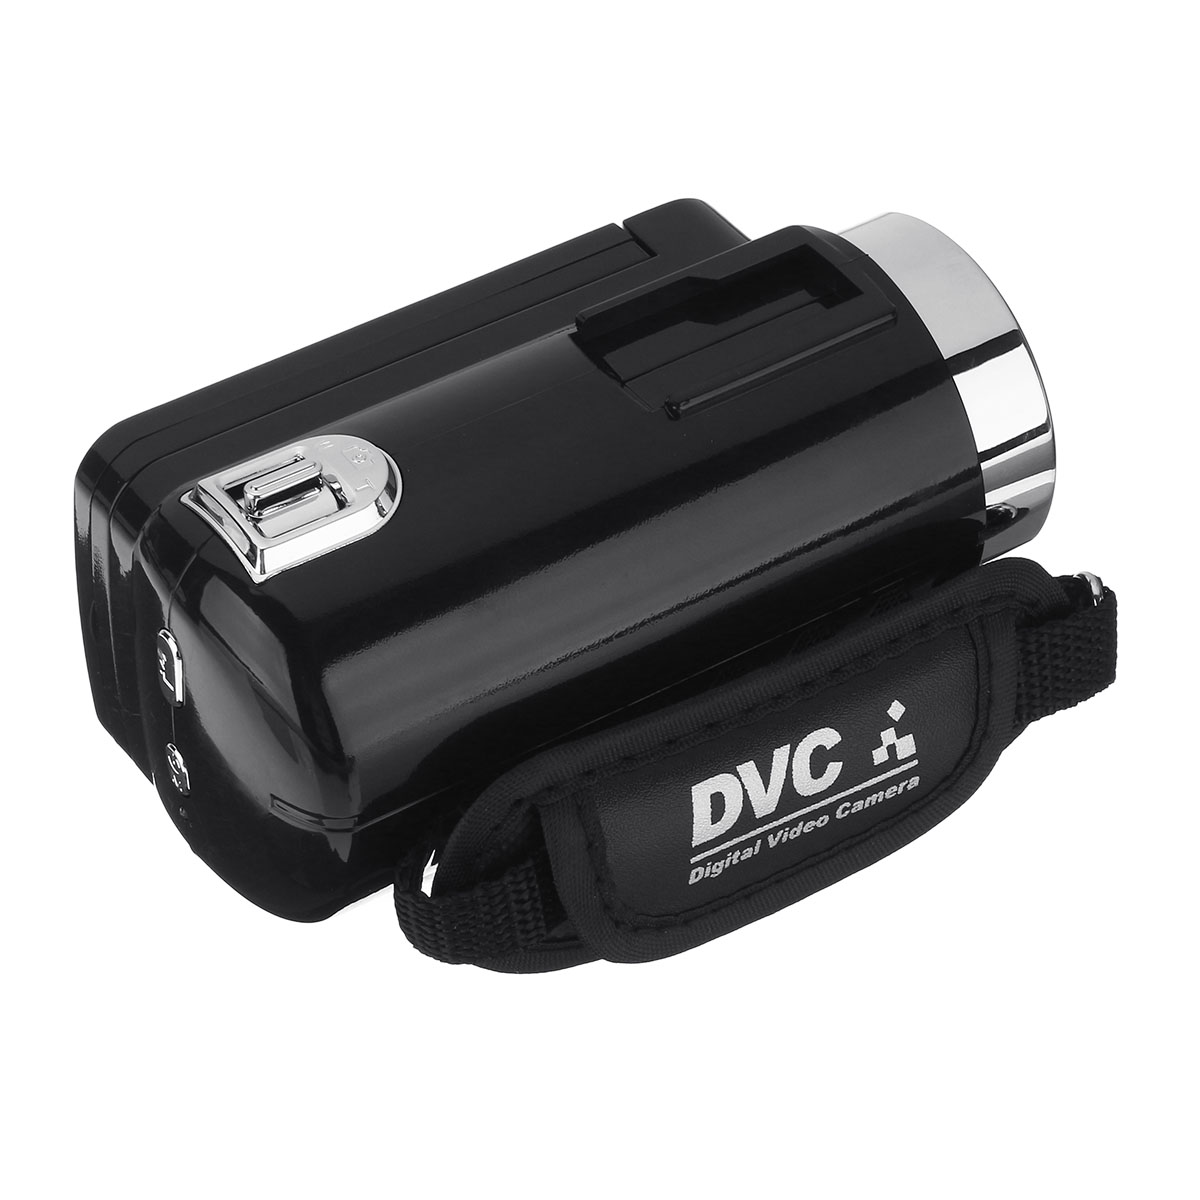 DC888-24MP-HD-Camcorder-18x-Digital-Zoom-Video-Camera-for-Youtube-Live-Vlog-Night-Vision-3-Inch-LCD--1719862